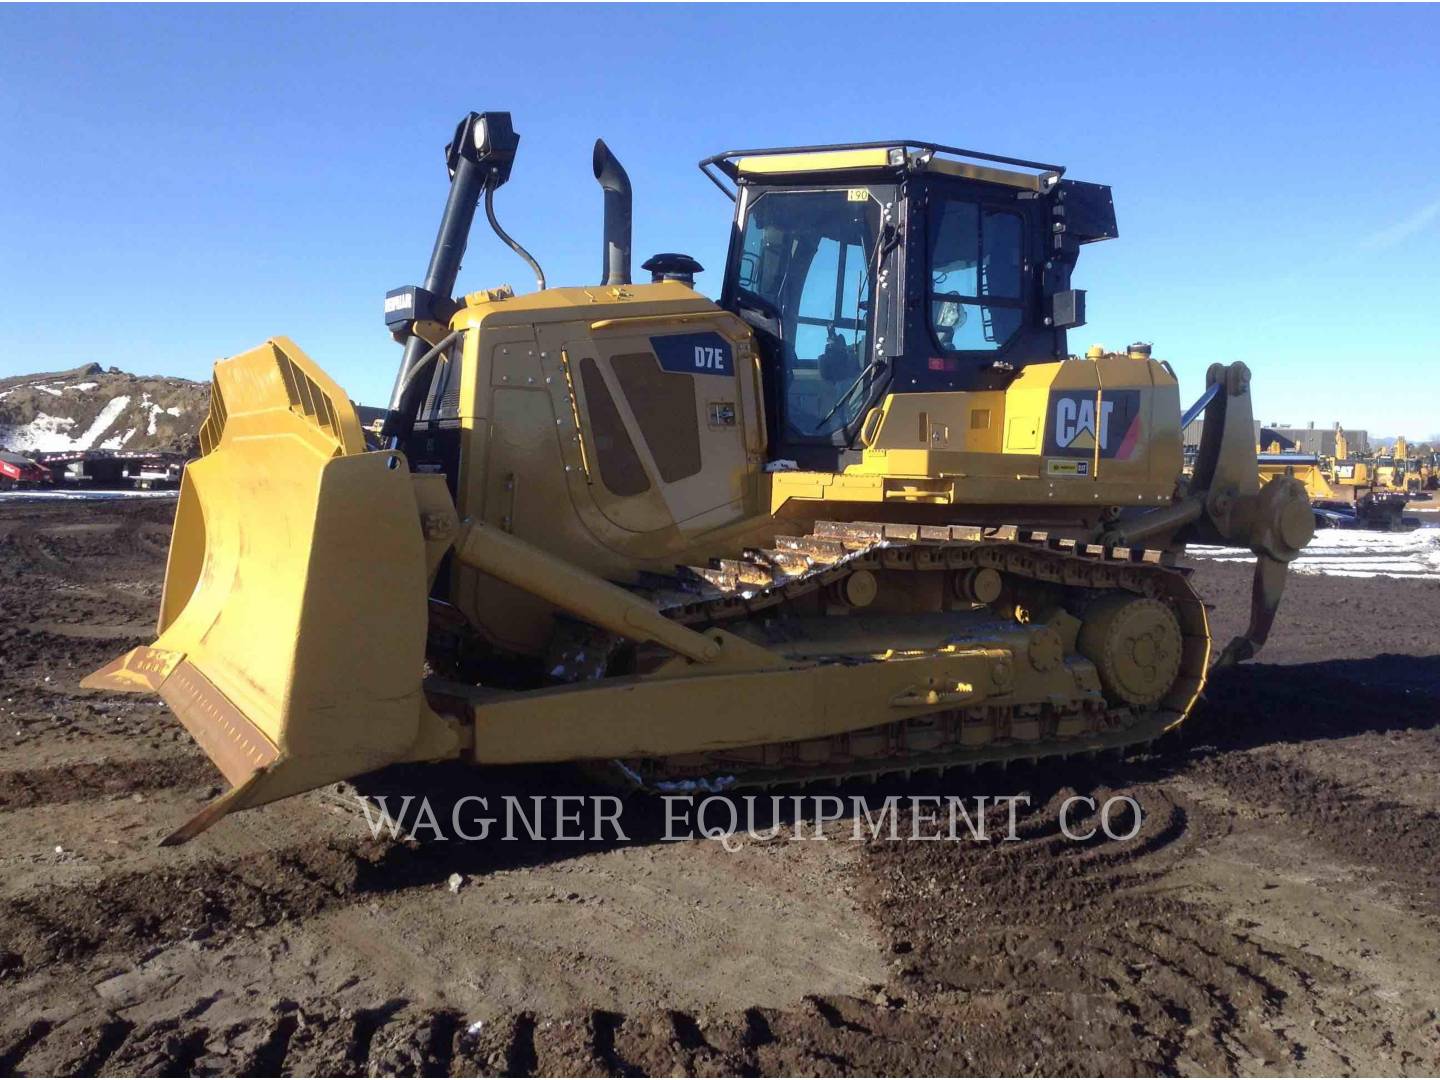 2010 Caterpillar D7E For Sale (2334733) from Wagner Equipment Co. [718 ...